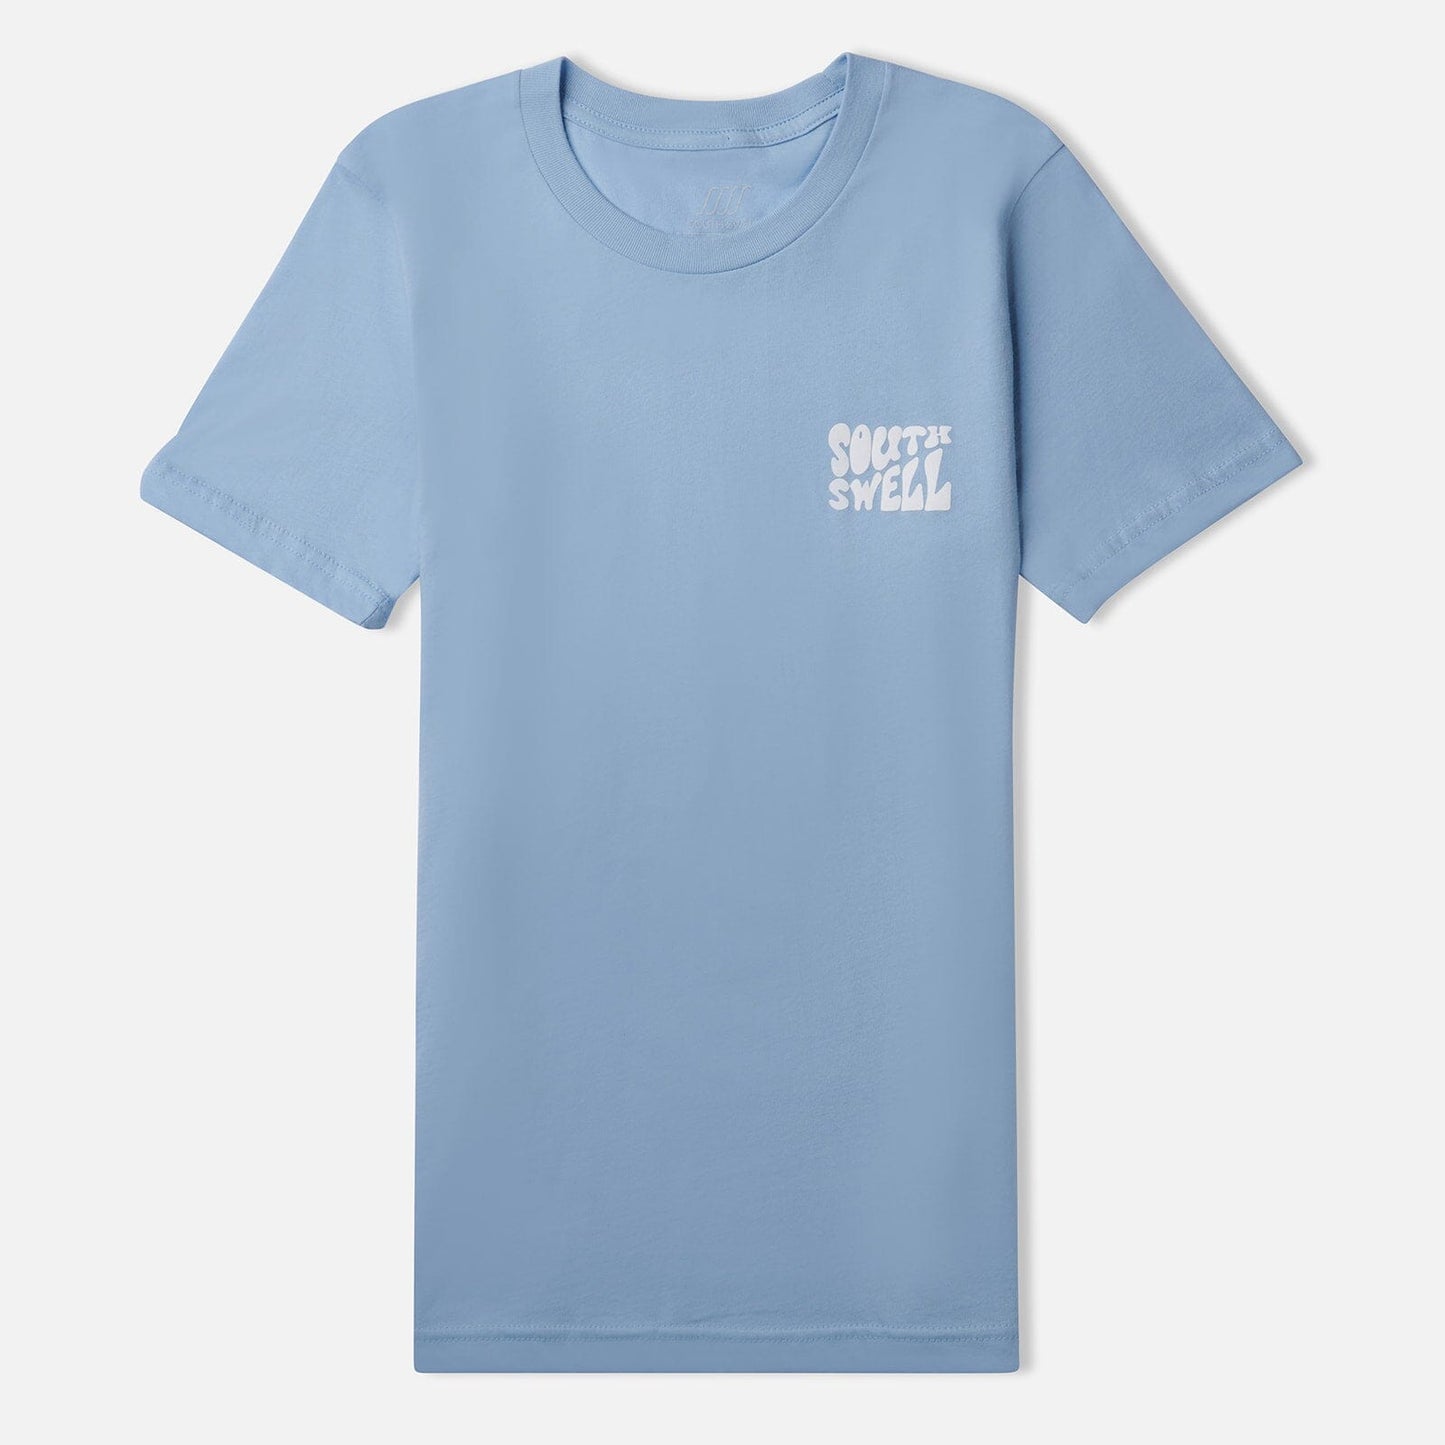 SOUTH SWELL Bubble Text Tee W Tees SOUTH SWELL 